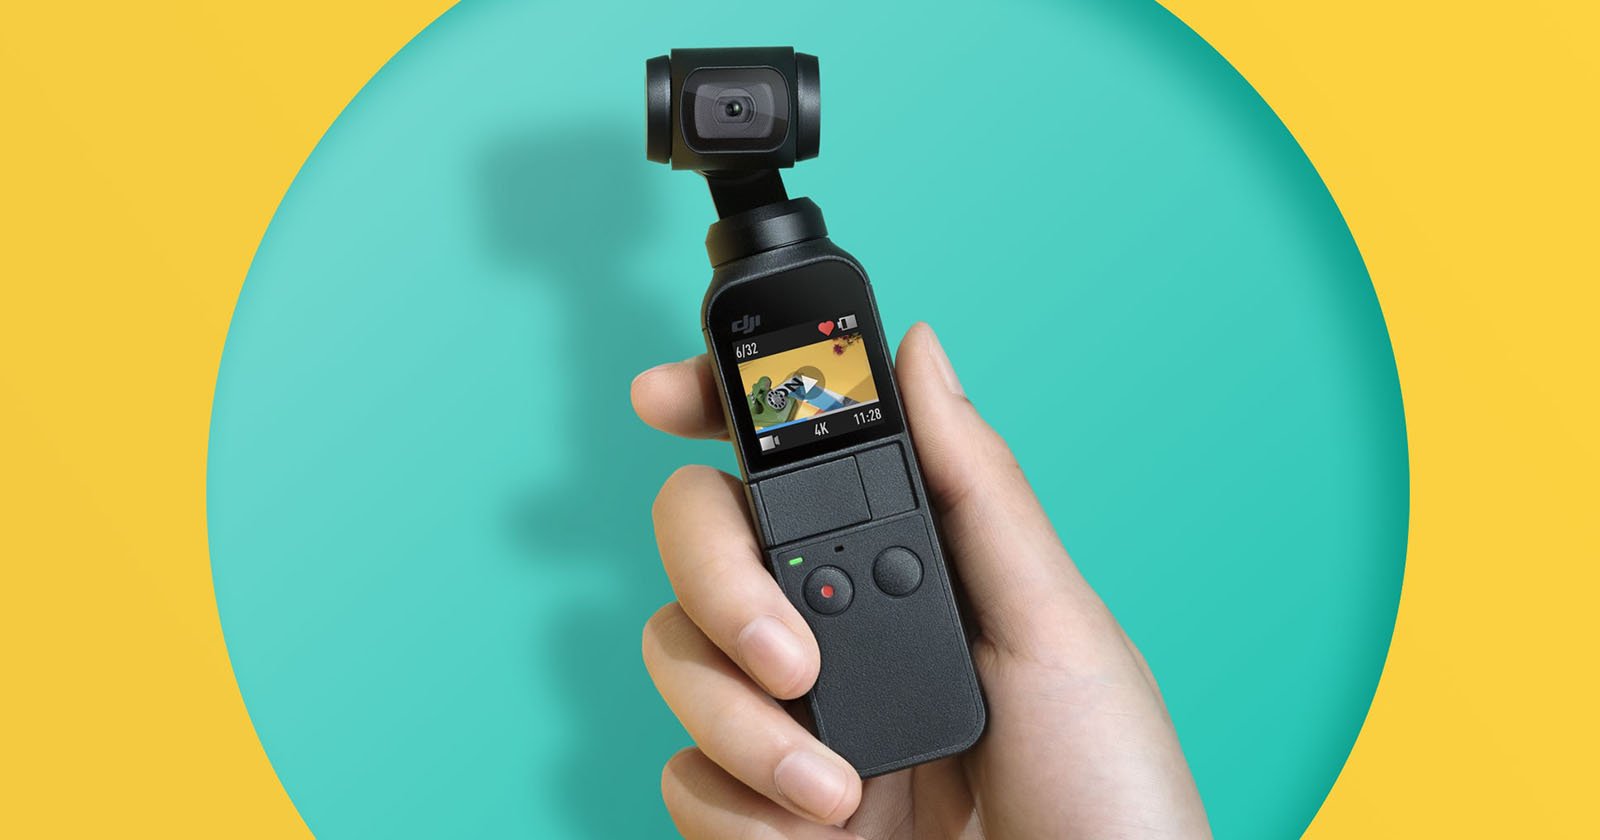 Osmo Mobile 6 — Parents and Kids Mode  Wondering how DJI Osmo Mobile 6 can  help you shoot better on the phone? Check out its new Parents and Kids  Mode! Learn